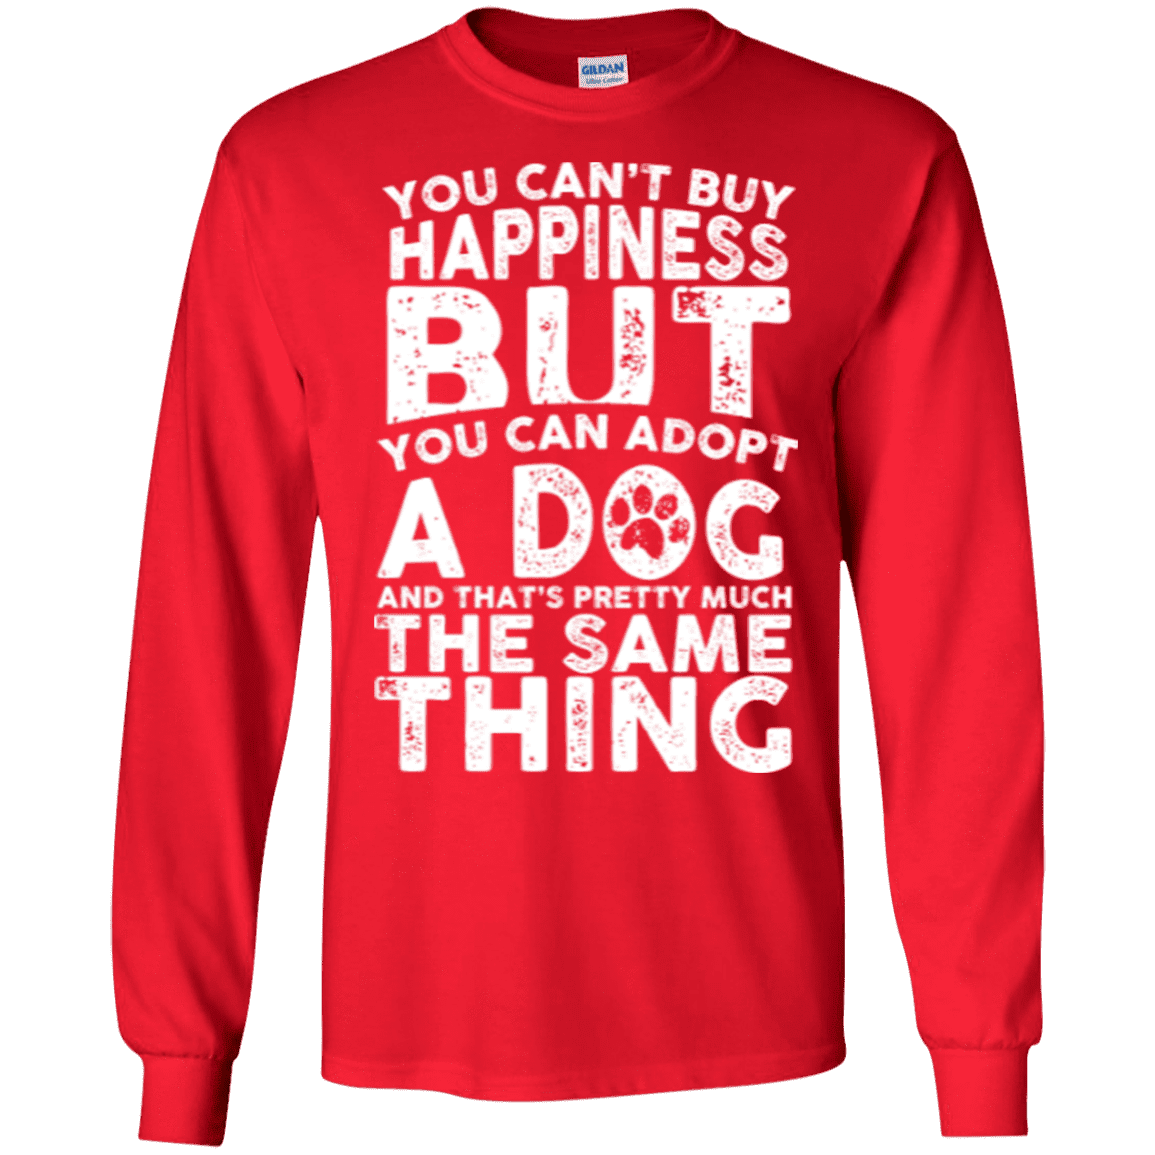 You Cant Buy Happiness - Long Sleeve T Shirt.